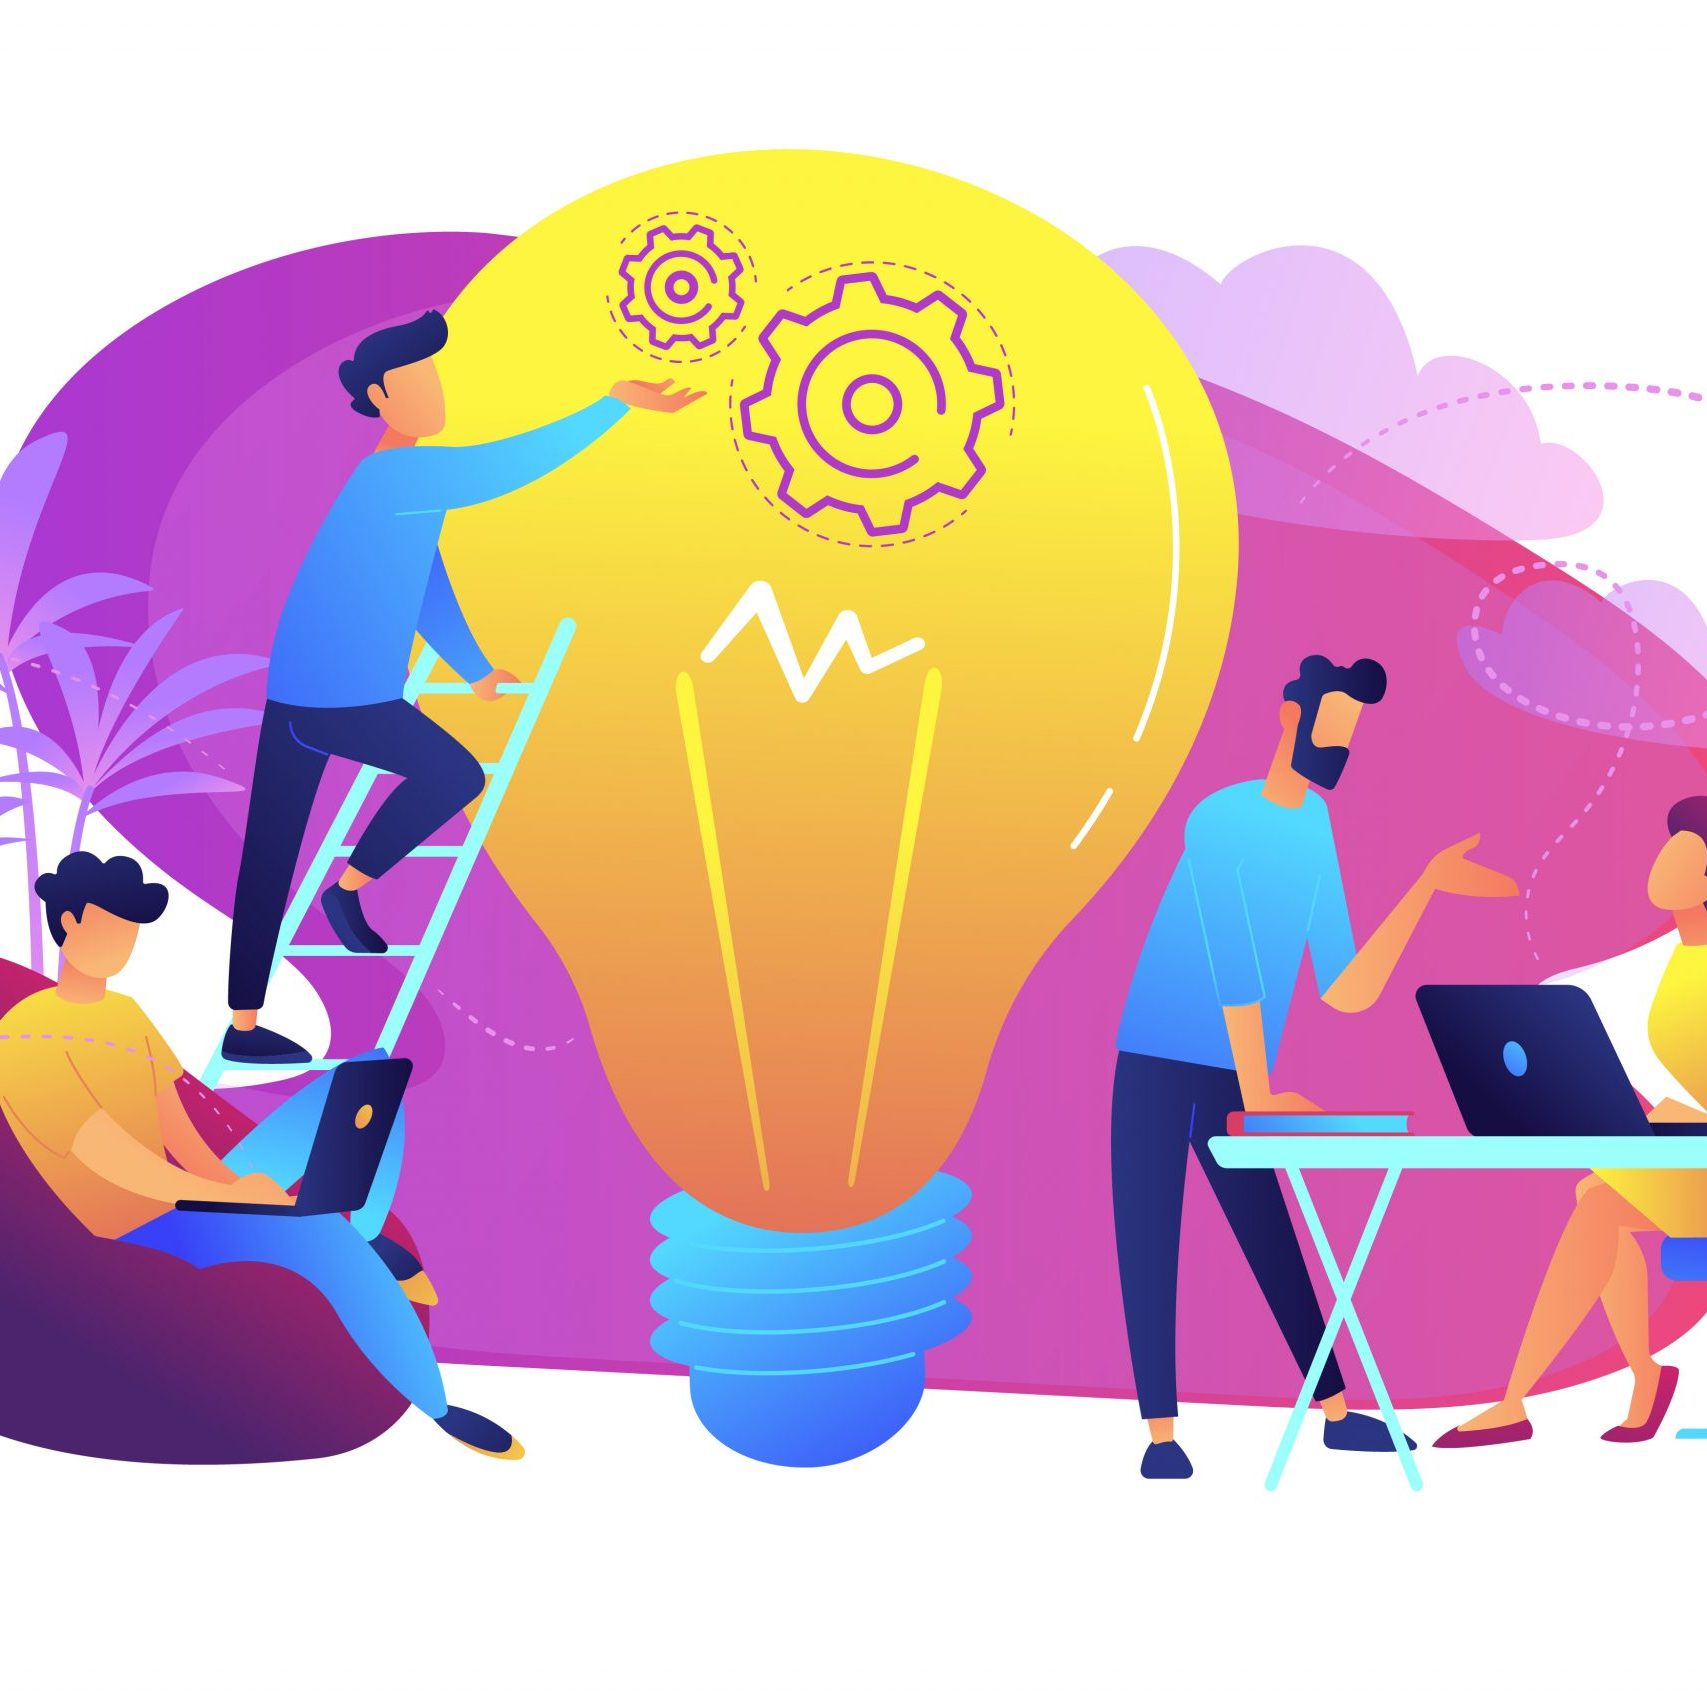 People working in friendly open space workplace. Coworking, freelance, teamwork, communication, interaction, idea, independent activity concept, violet palette. Vector illustration on white background